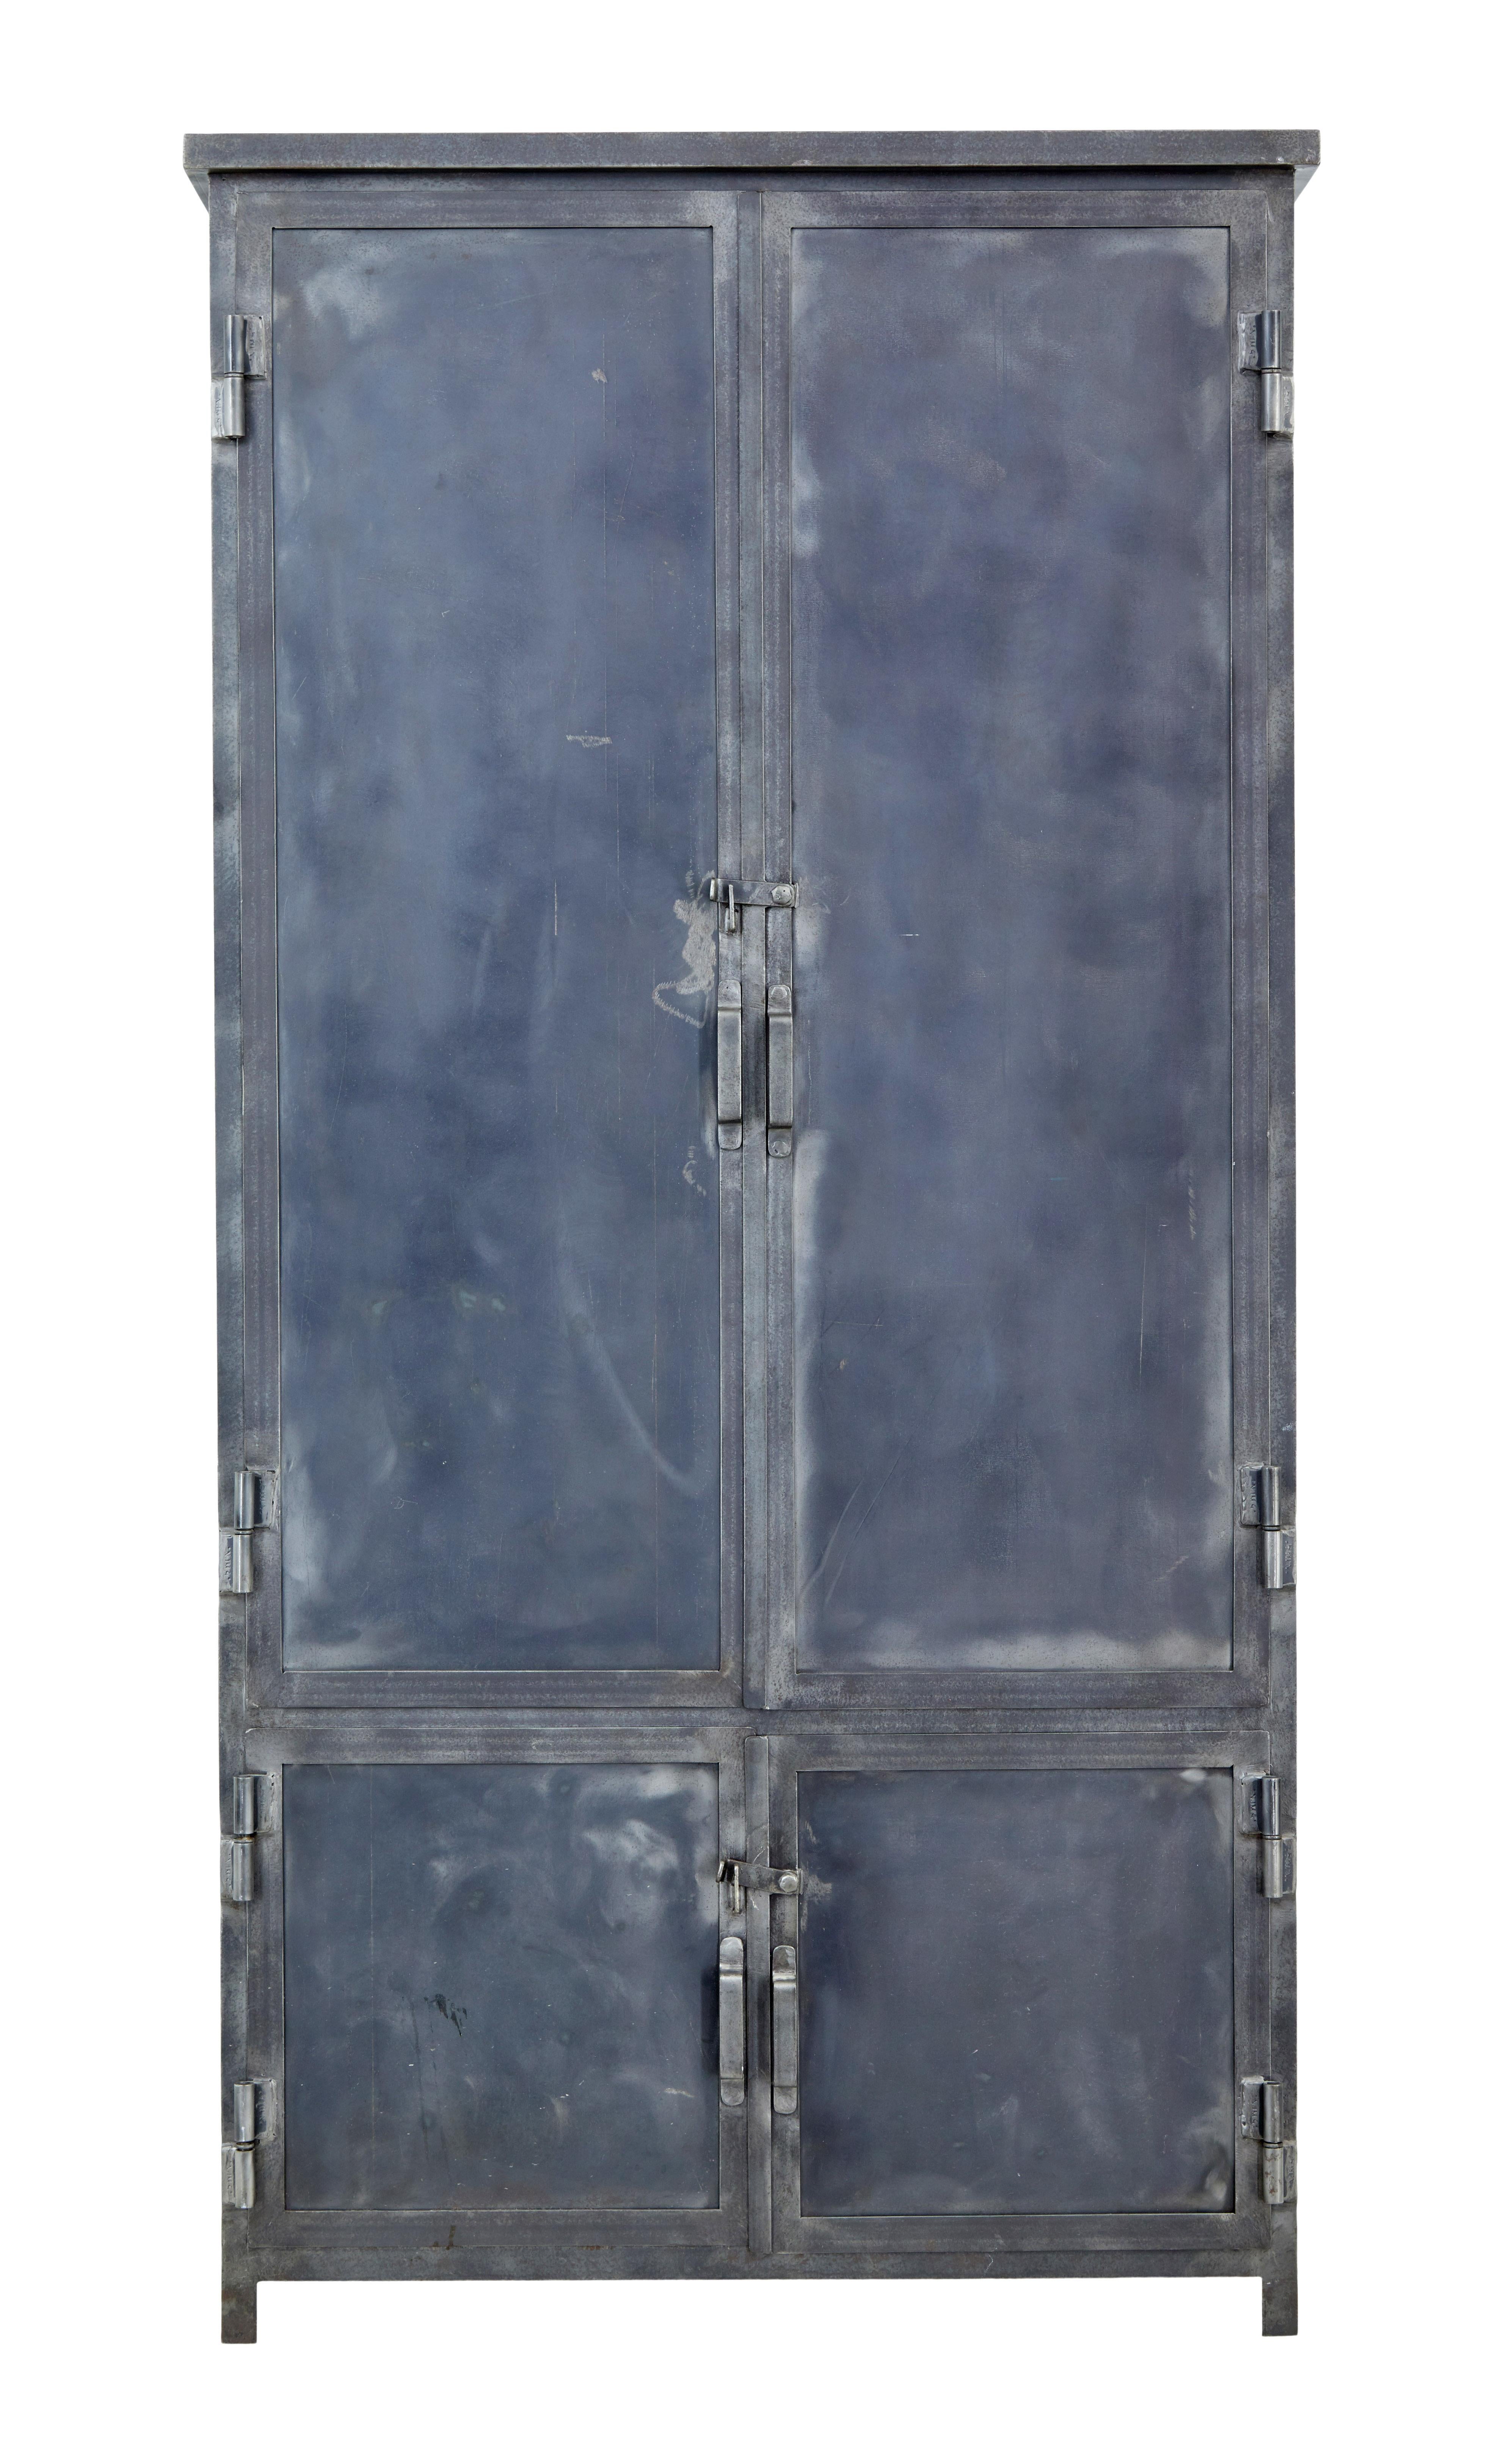 Good quality handmade industrial inspired steel cabinet, circa 1960.

Comprising of a double door cabinet with 2 fixed shelves to the top and a double door smaller cupboard below. Each door fitted with latches and handles. All doors fitted with